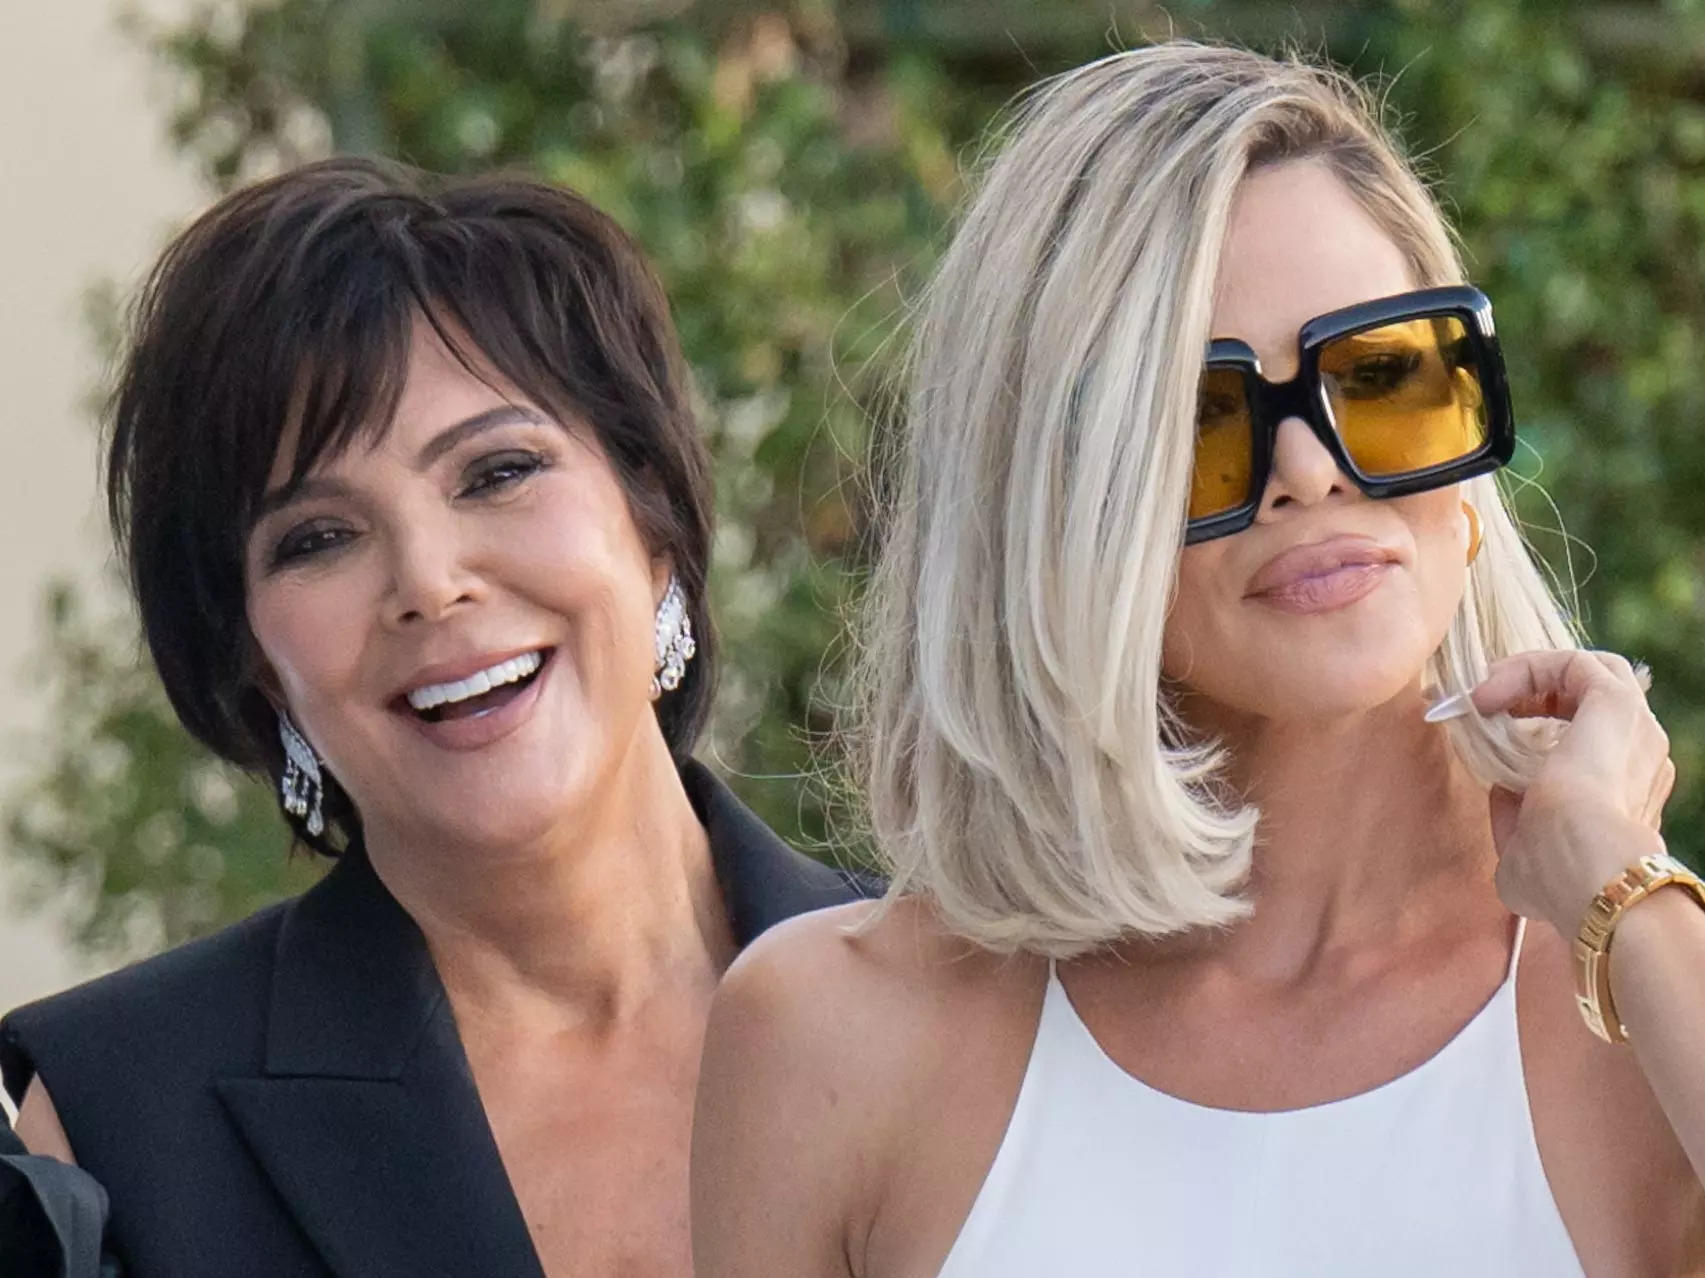 Khloé Kardashian And Kris Jenner Talked About Getting Mother Daughter Boob Jobs Together After 